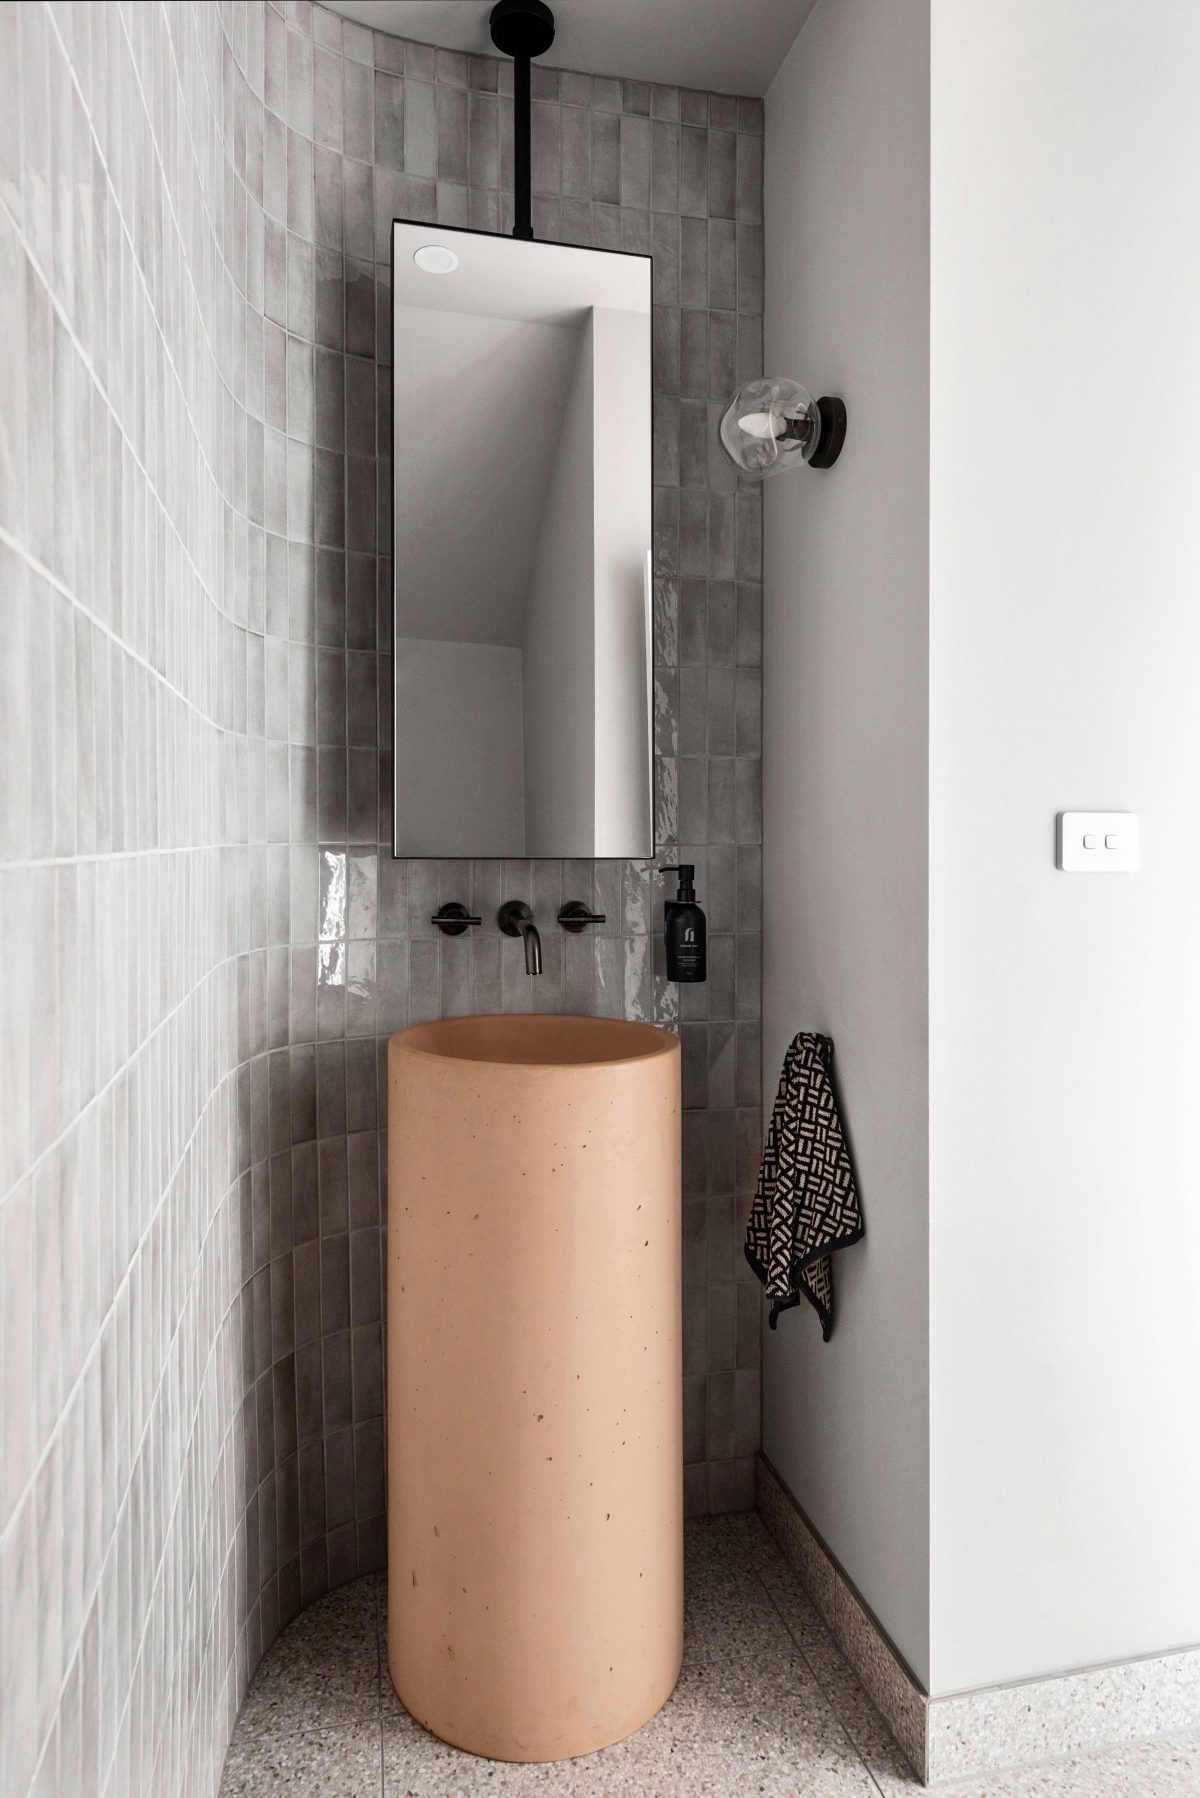 Powder Room Interior Design Camberwell Curved Tiled Feature Wall Hanging Mirror Pink Concrete Basin